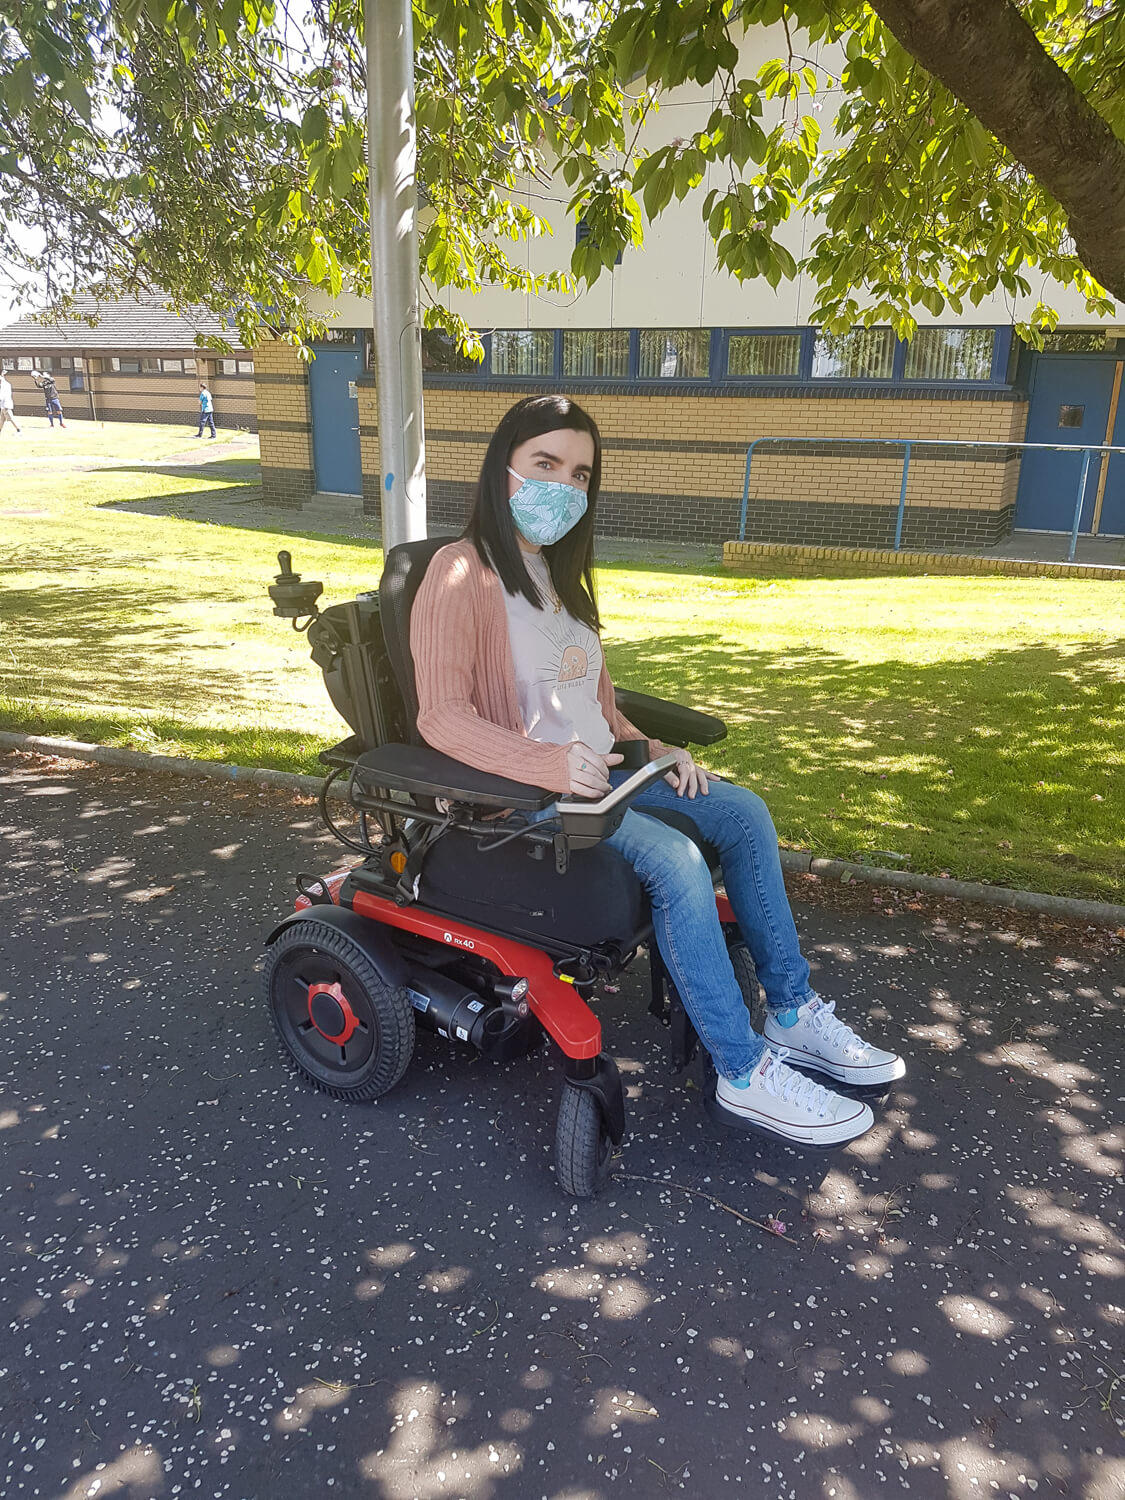 Emma, a white woman sitting in her powered wheelchair outside next to a grassy area and tree. Emma is wearing a peach cardigan, skinny jeans and white converse shoes. She has a face mask covering her nose and mouth.